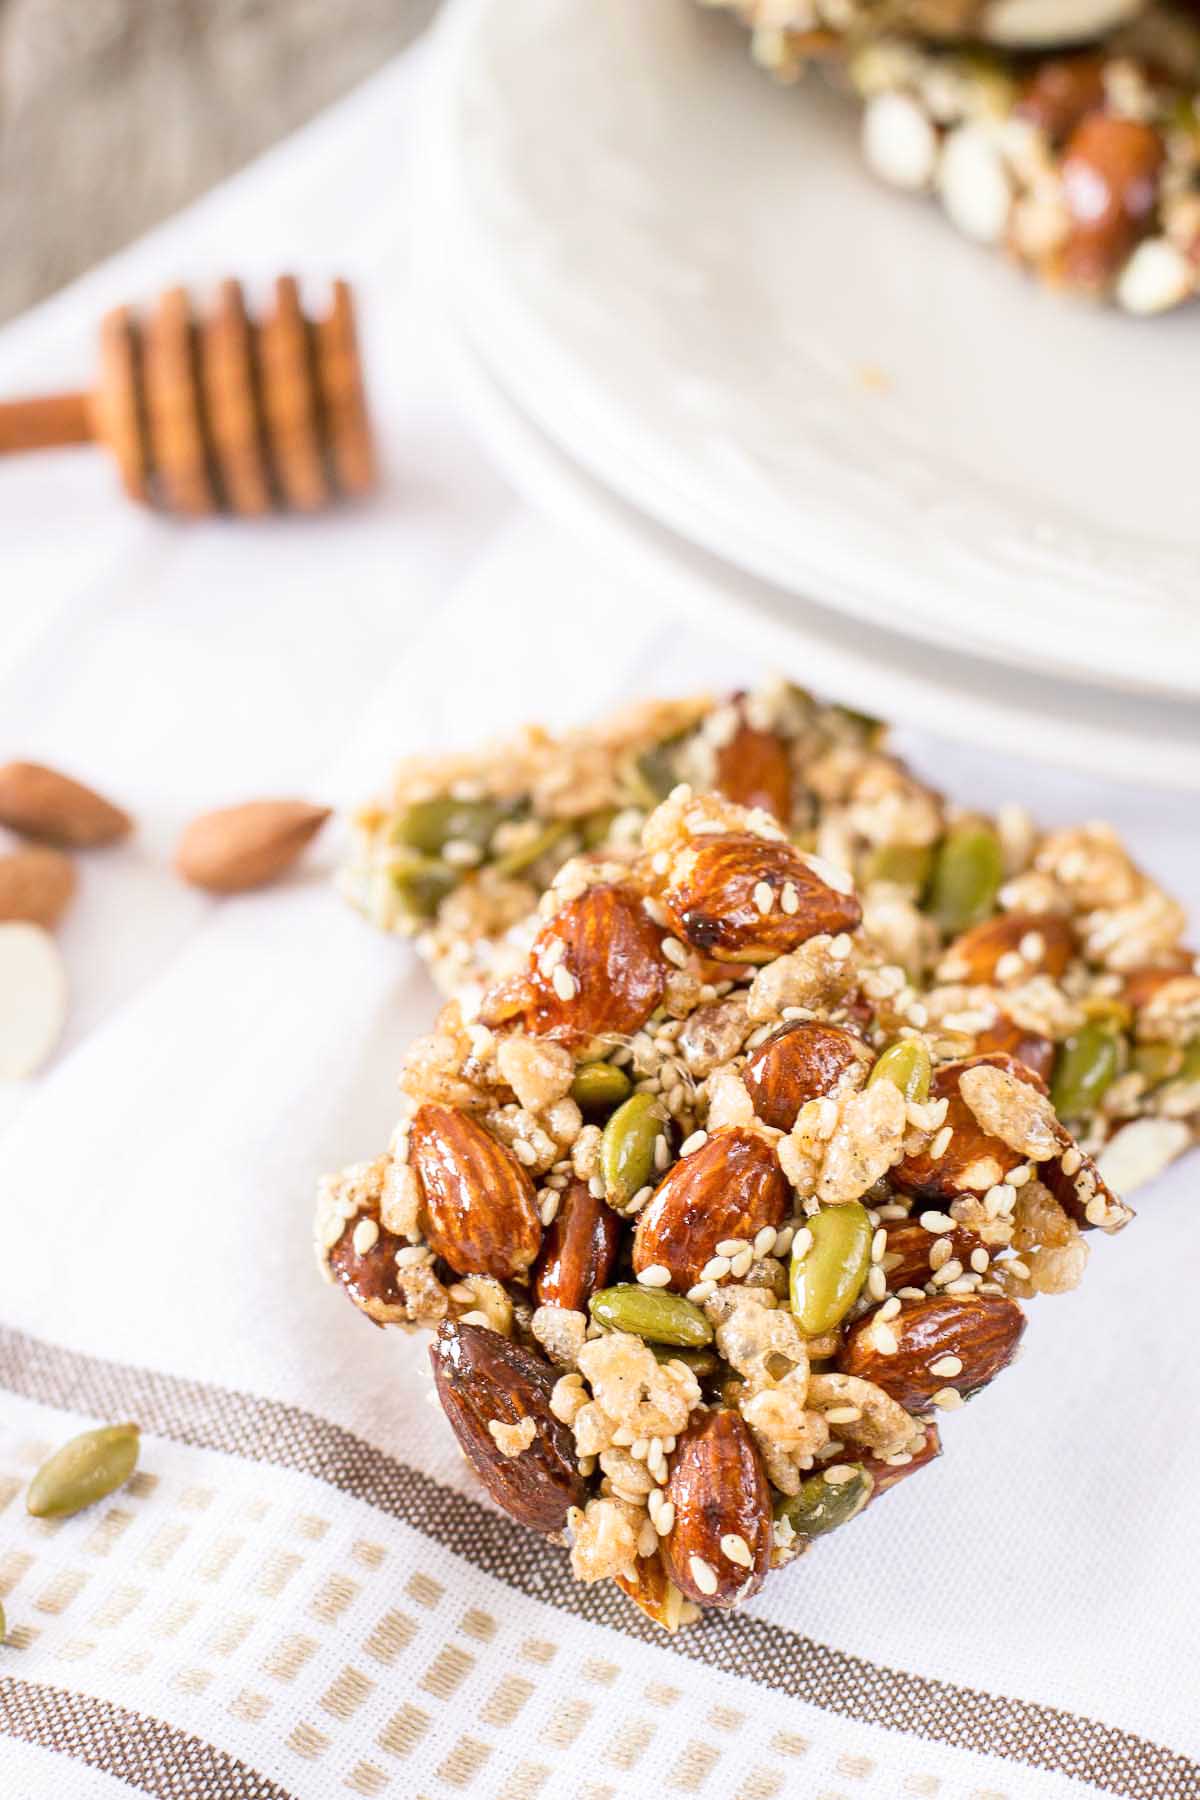 MAKE YOUR OWN PART OF ALMOND OR (DRY FRUIT) 